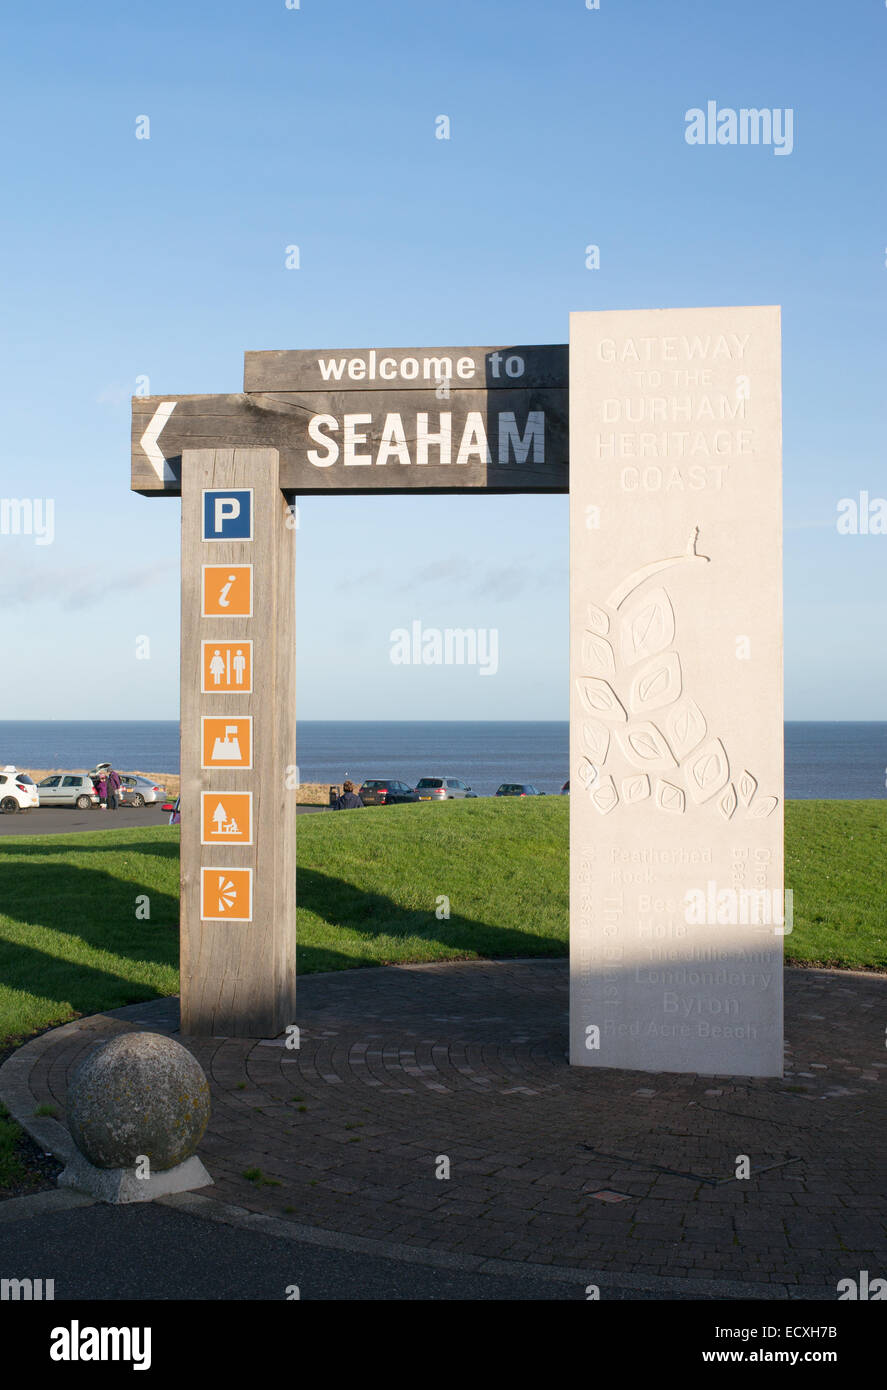 Welcome to Seaham sign, County Durham, England, UK Stock Photo